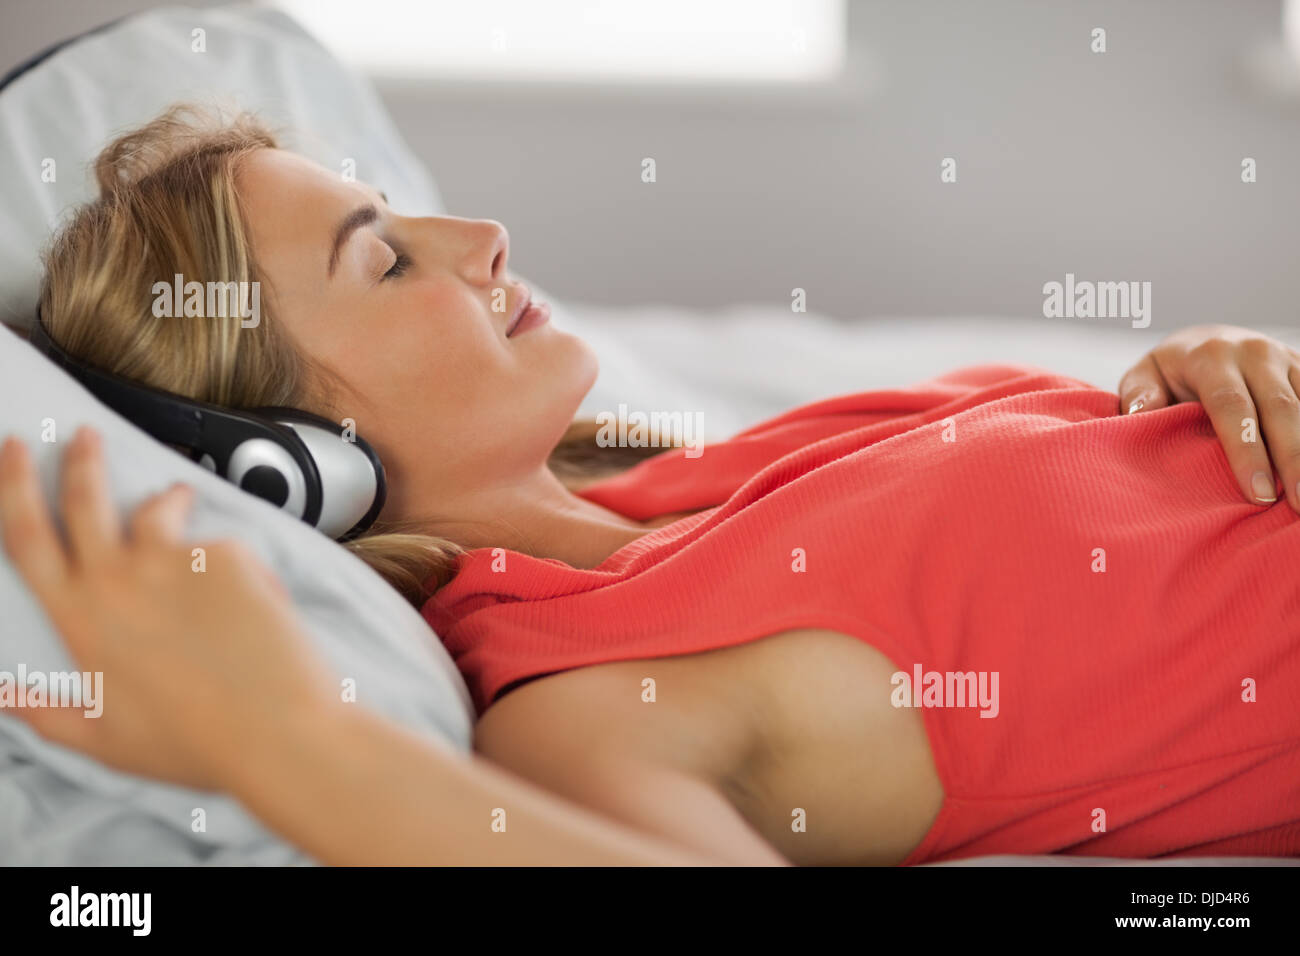 Peaceful blonde wearing dress lying on bed listening to music Banque D'Images